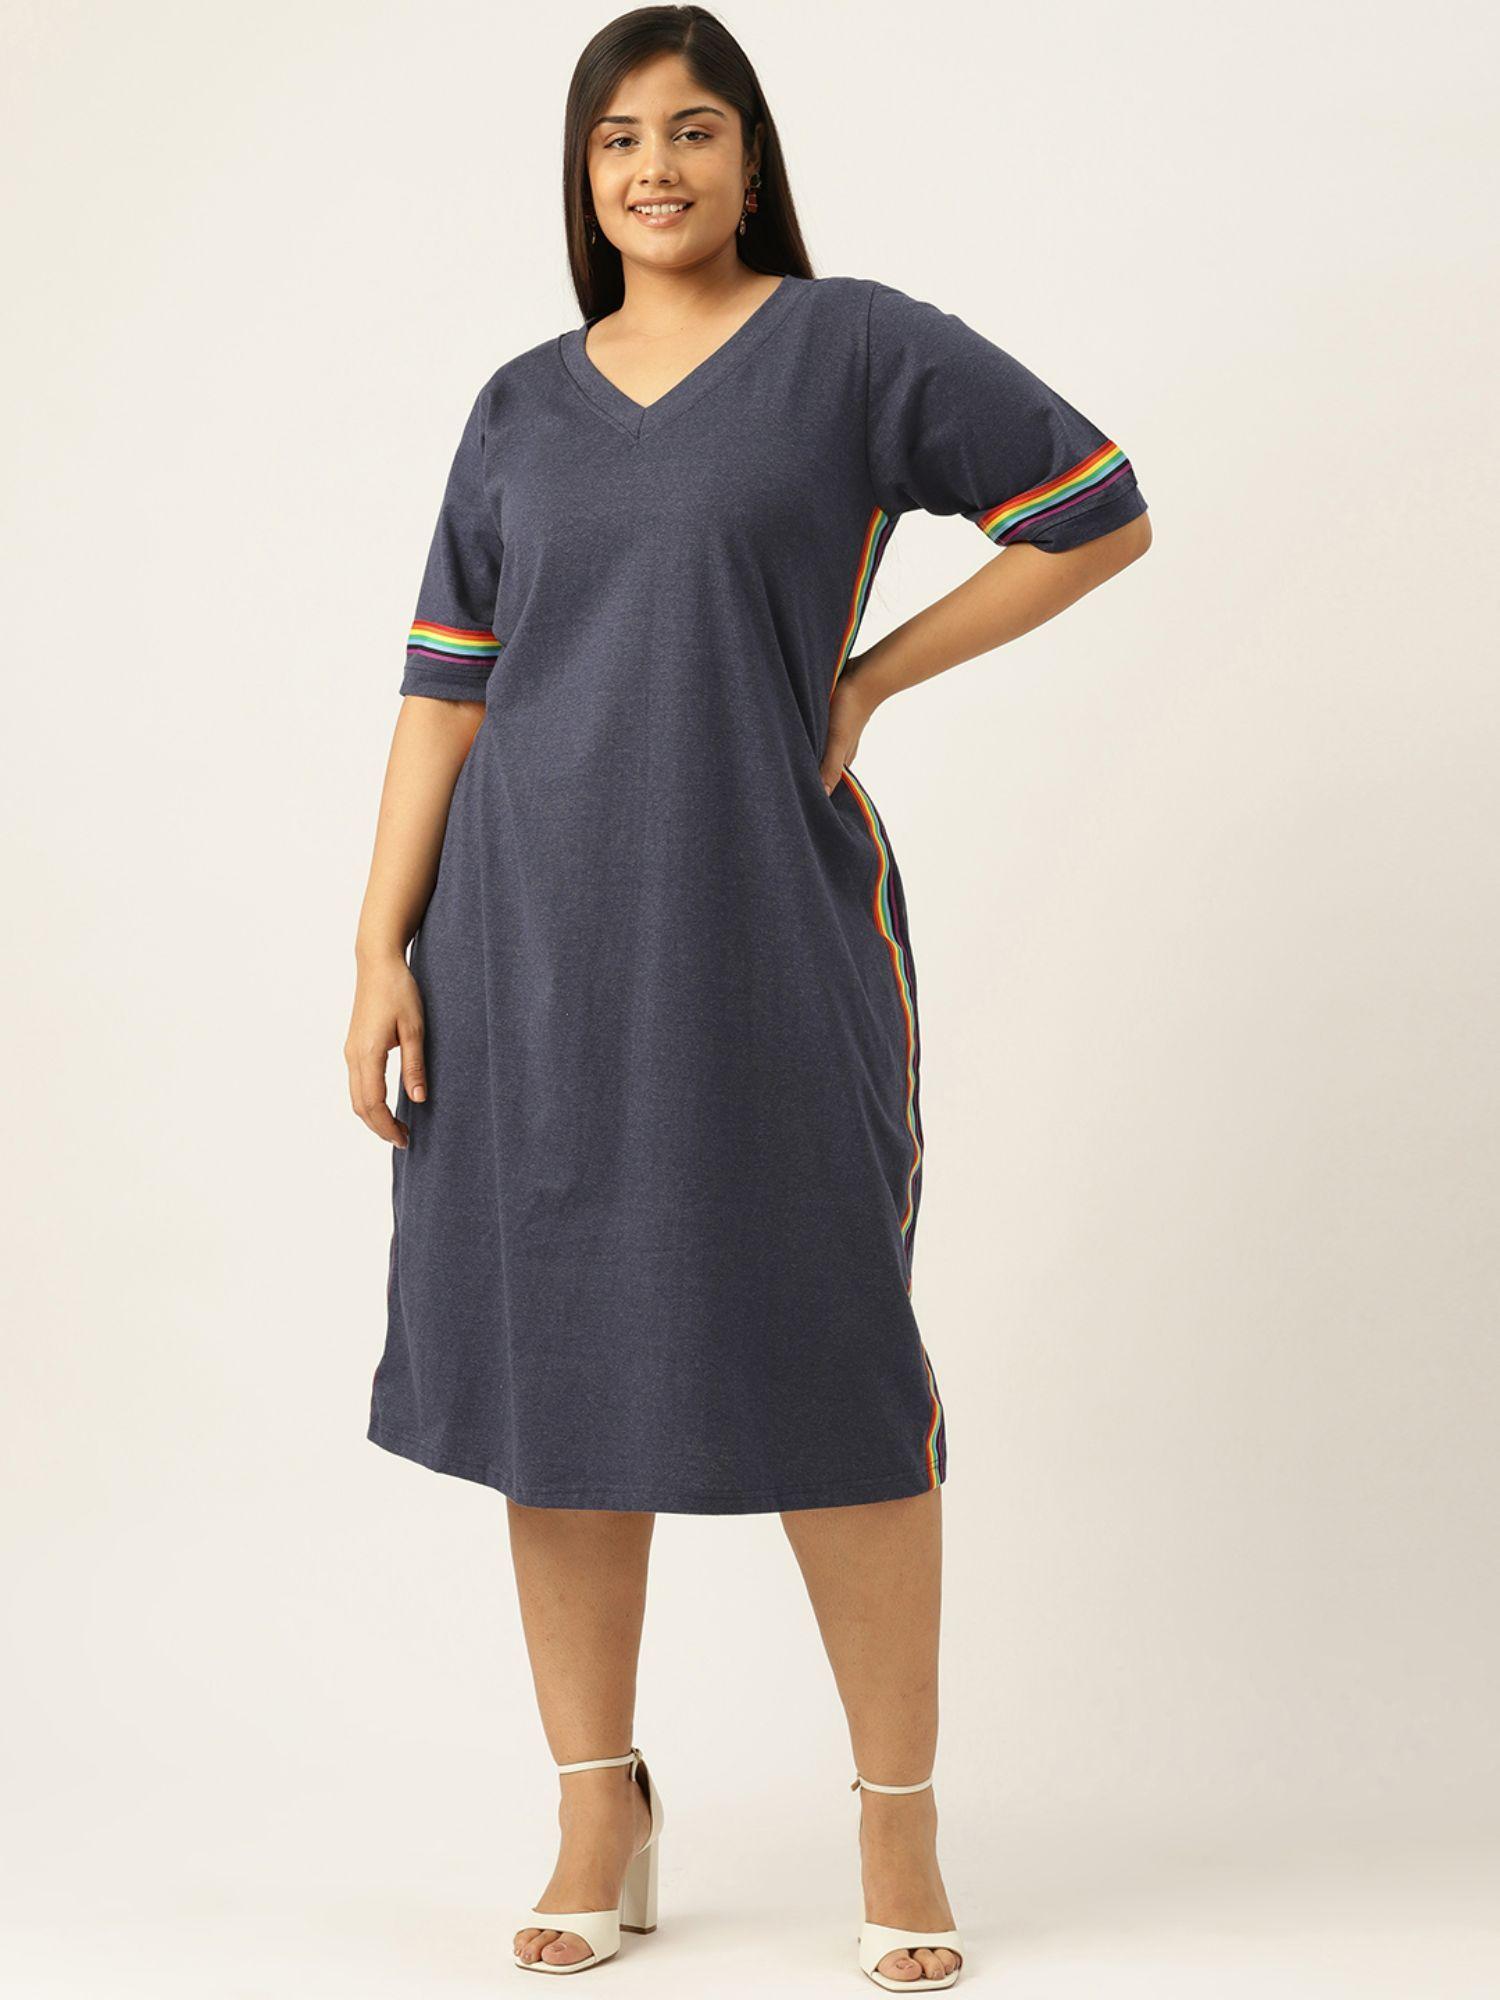 Plus Size Womens Melange Blue Solid Cotton Knitted A-Line Dress